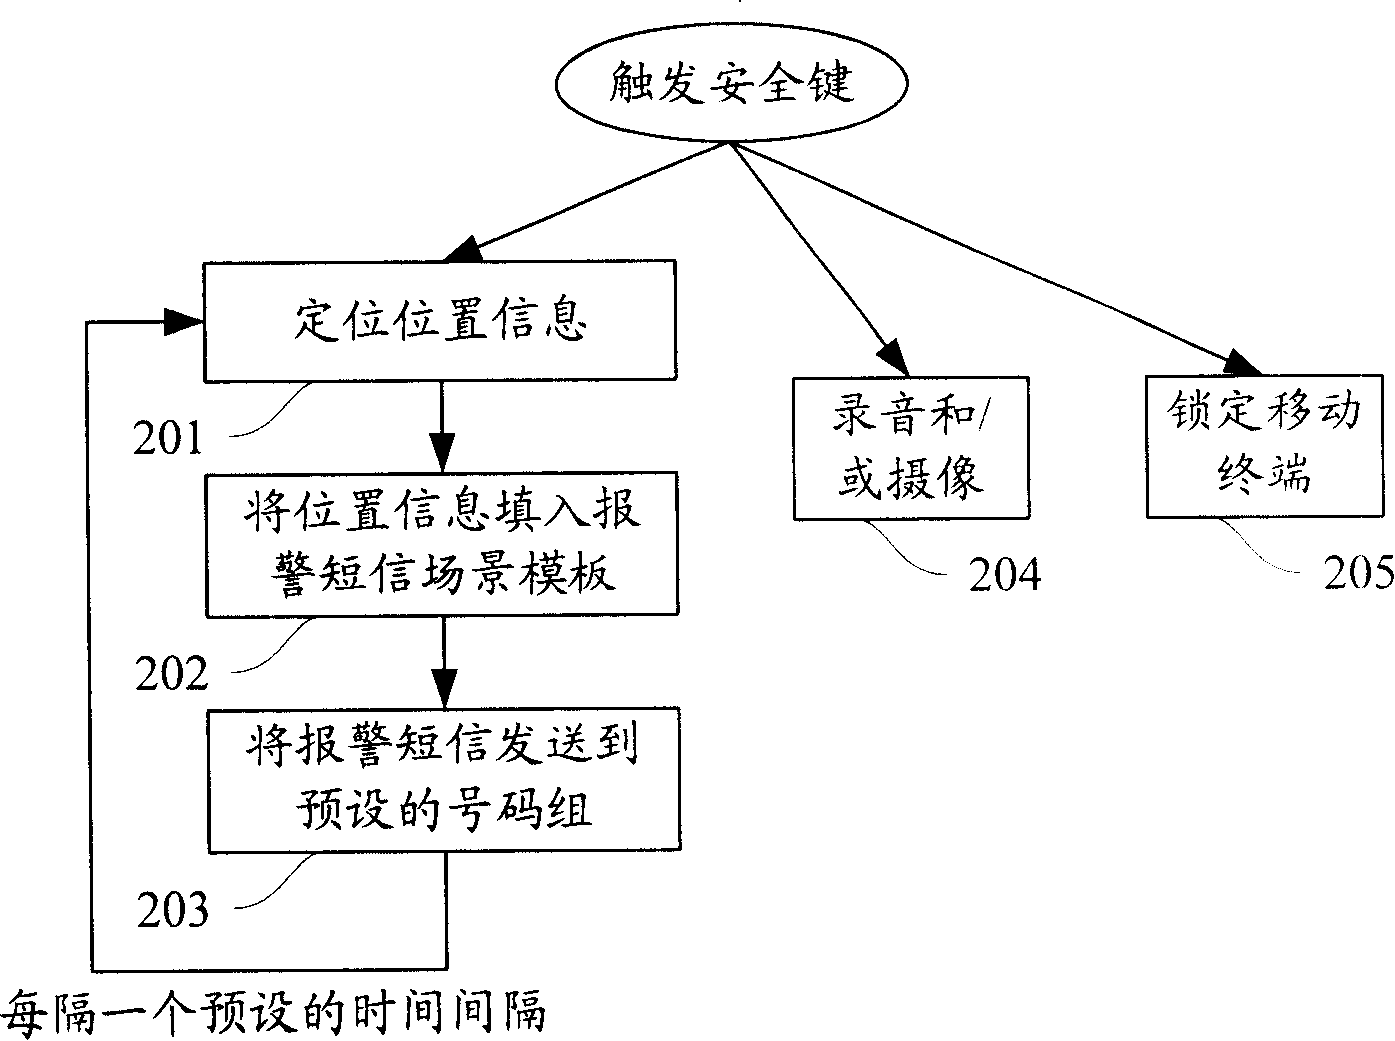 Method and device for implementing automatic alarm from mobile terminal